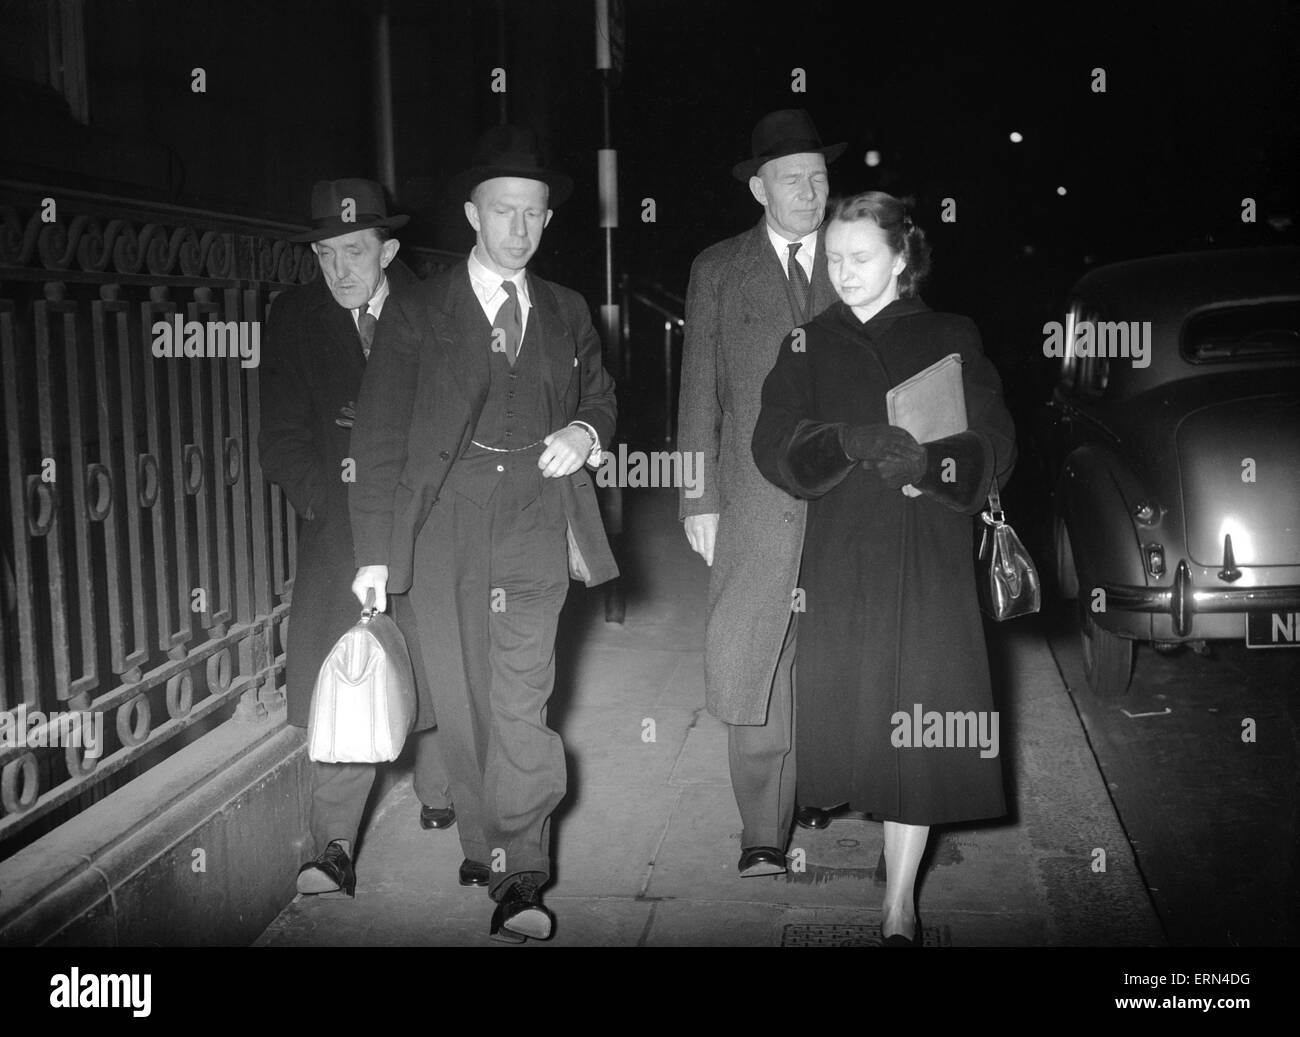 Dr. Keith Simpson (second left) the Home Office pathologist arriving at the Ritz hotel shortly before seven o'clock last night with his secretary Jean Scott Dunn and Detective Superintendent John Burrett (3rd left)  After detectives were called to the exclusive Ritz Hotel  in Piccadilly London after breaking down a door of a bedroom and finding the bodies of a man and a woman. The man was hanging from a wardrobe and the woman lay near him with her throat cut. There were signs of a struggle. It appeared that the man had first attacked the woman and cut her throat with a razor and then hung Stock Photo